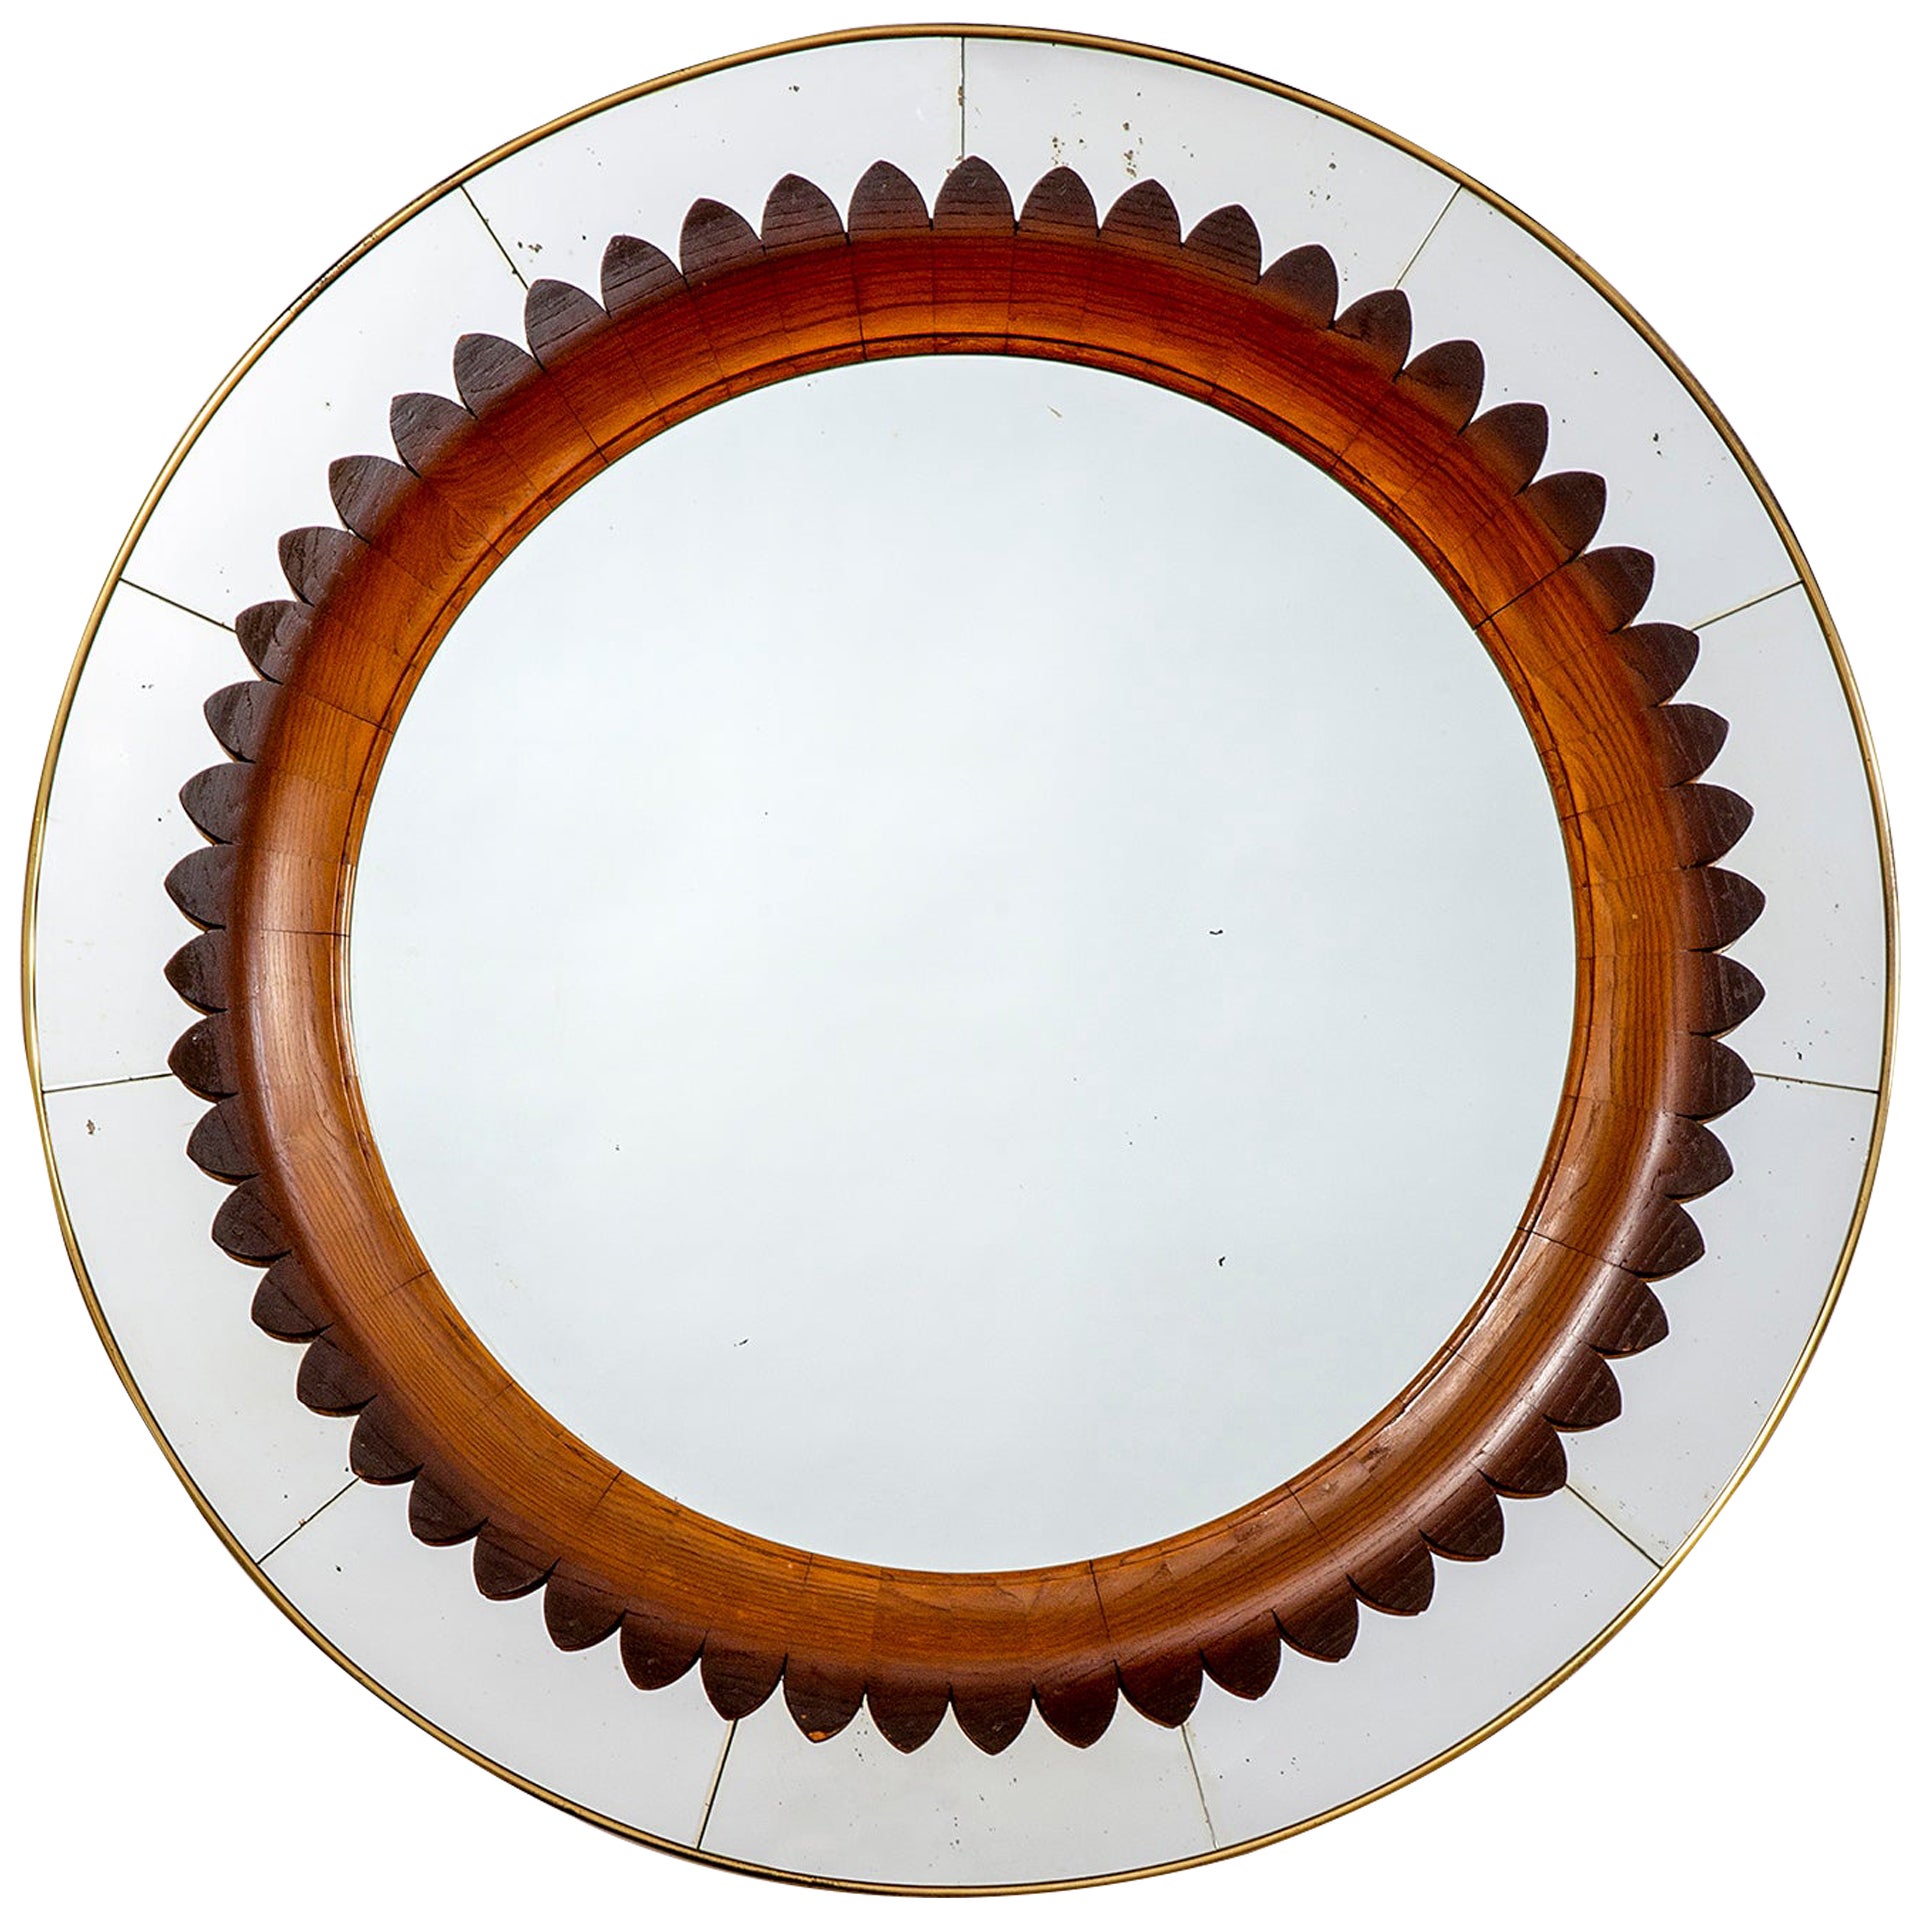 20th Century Marelli Production Wall Round Mirror with Frame in Brass and Wood